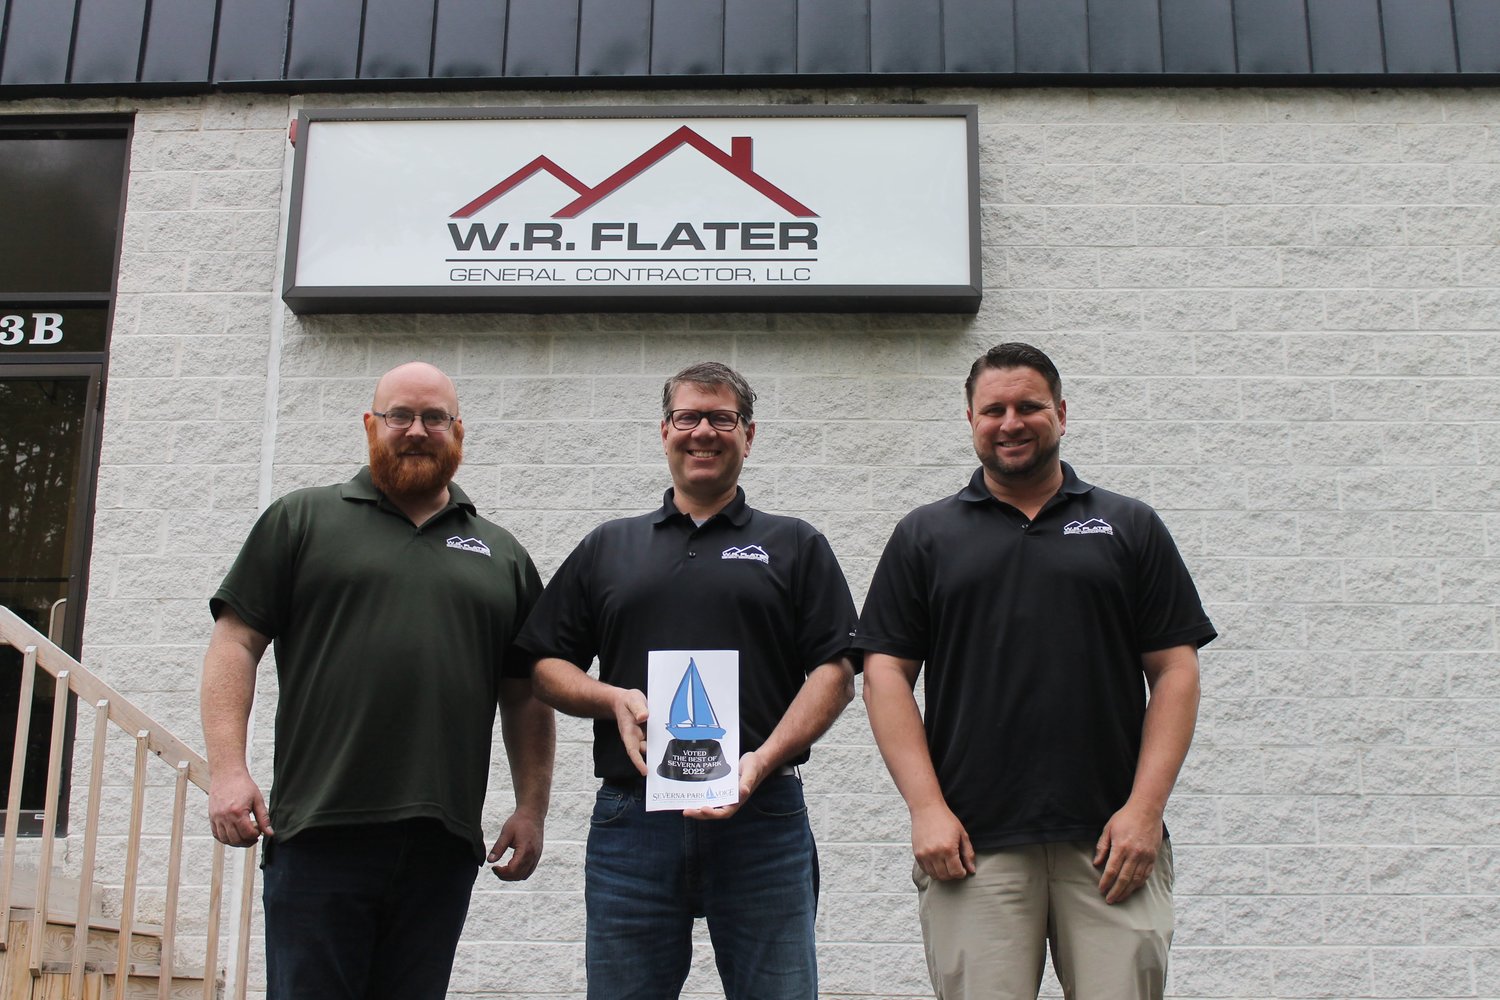 Rick Flater (center) received the Best Home Improvement Contractor award. He was flanked by Jason Haschert (left) and John Brill outside of the WR Flater office.